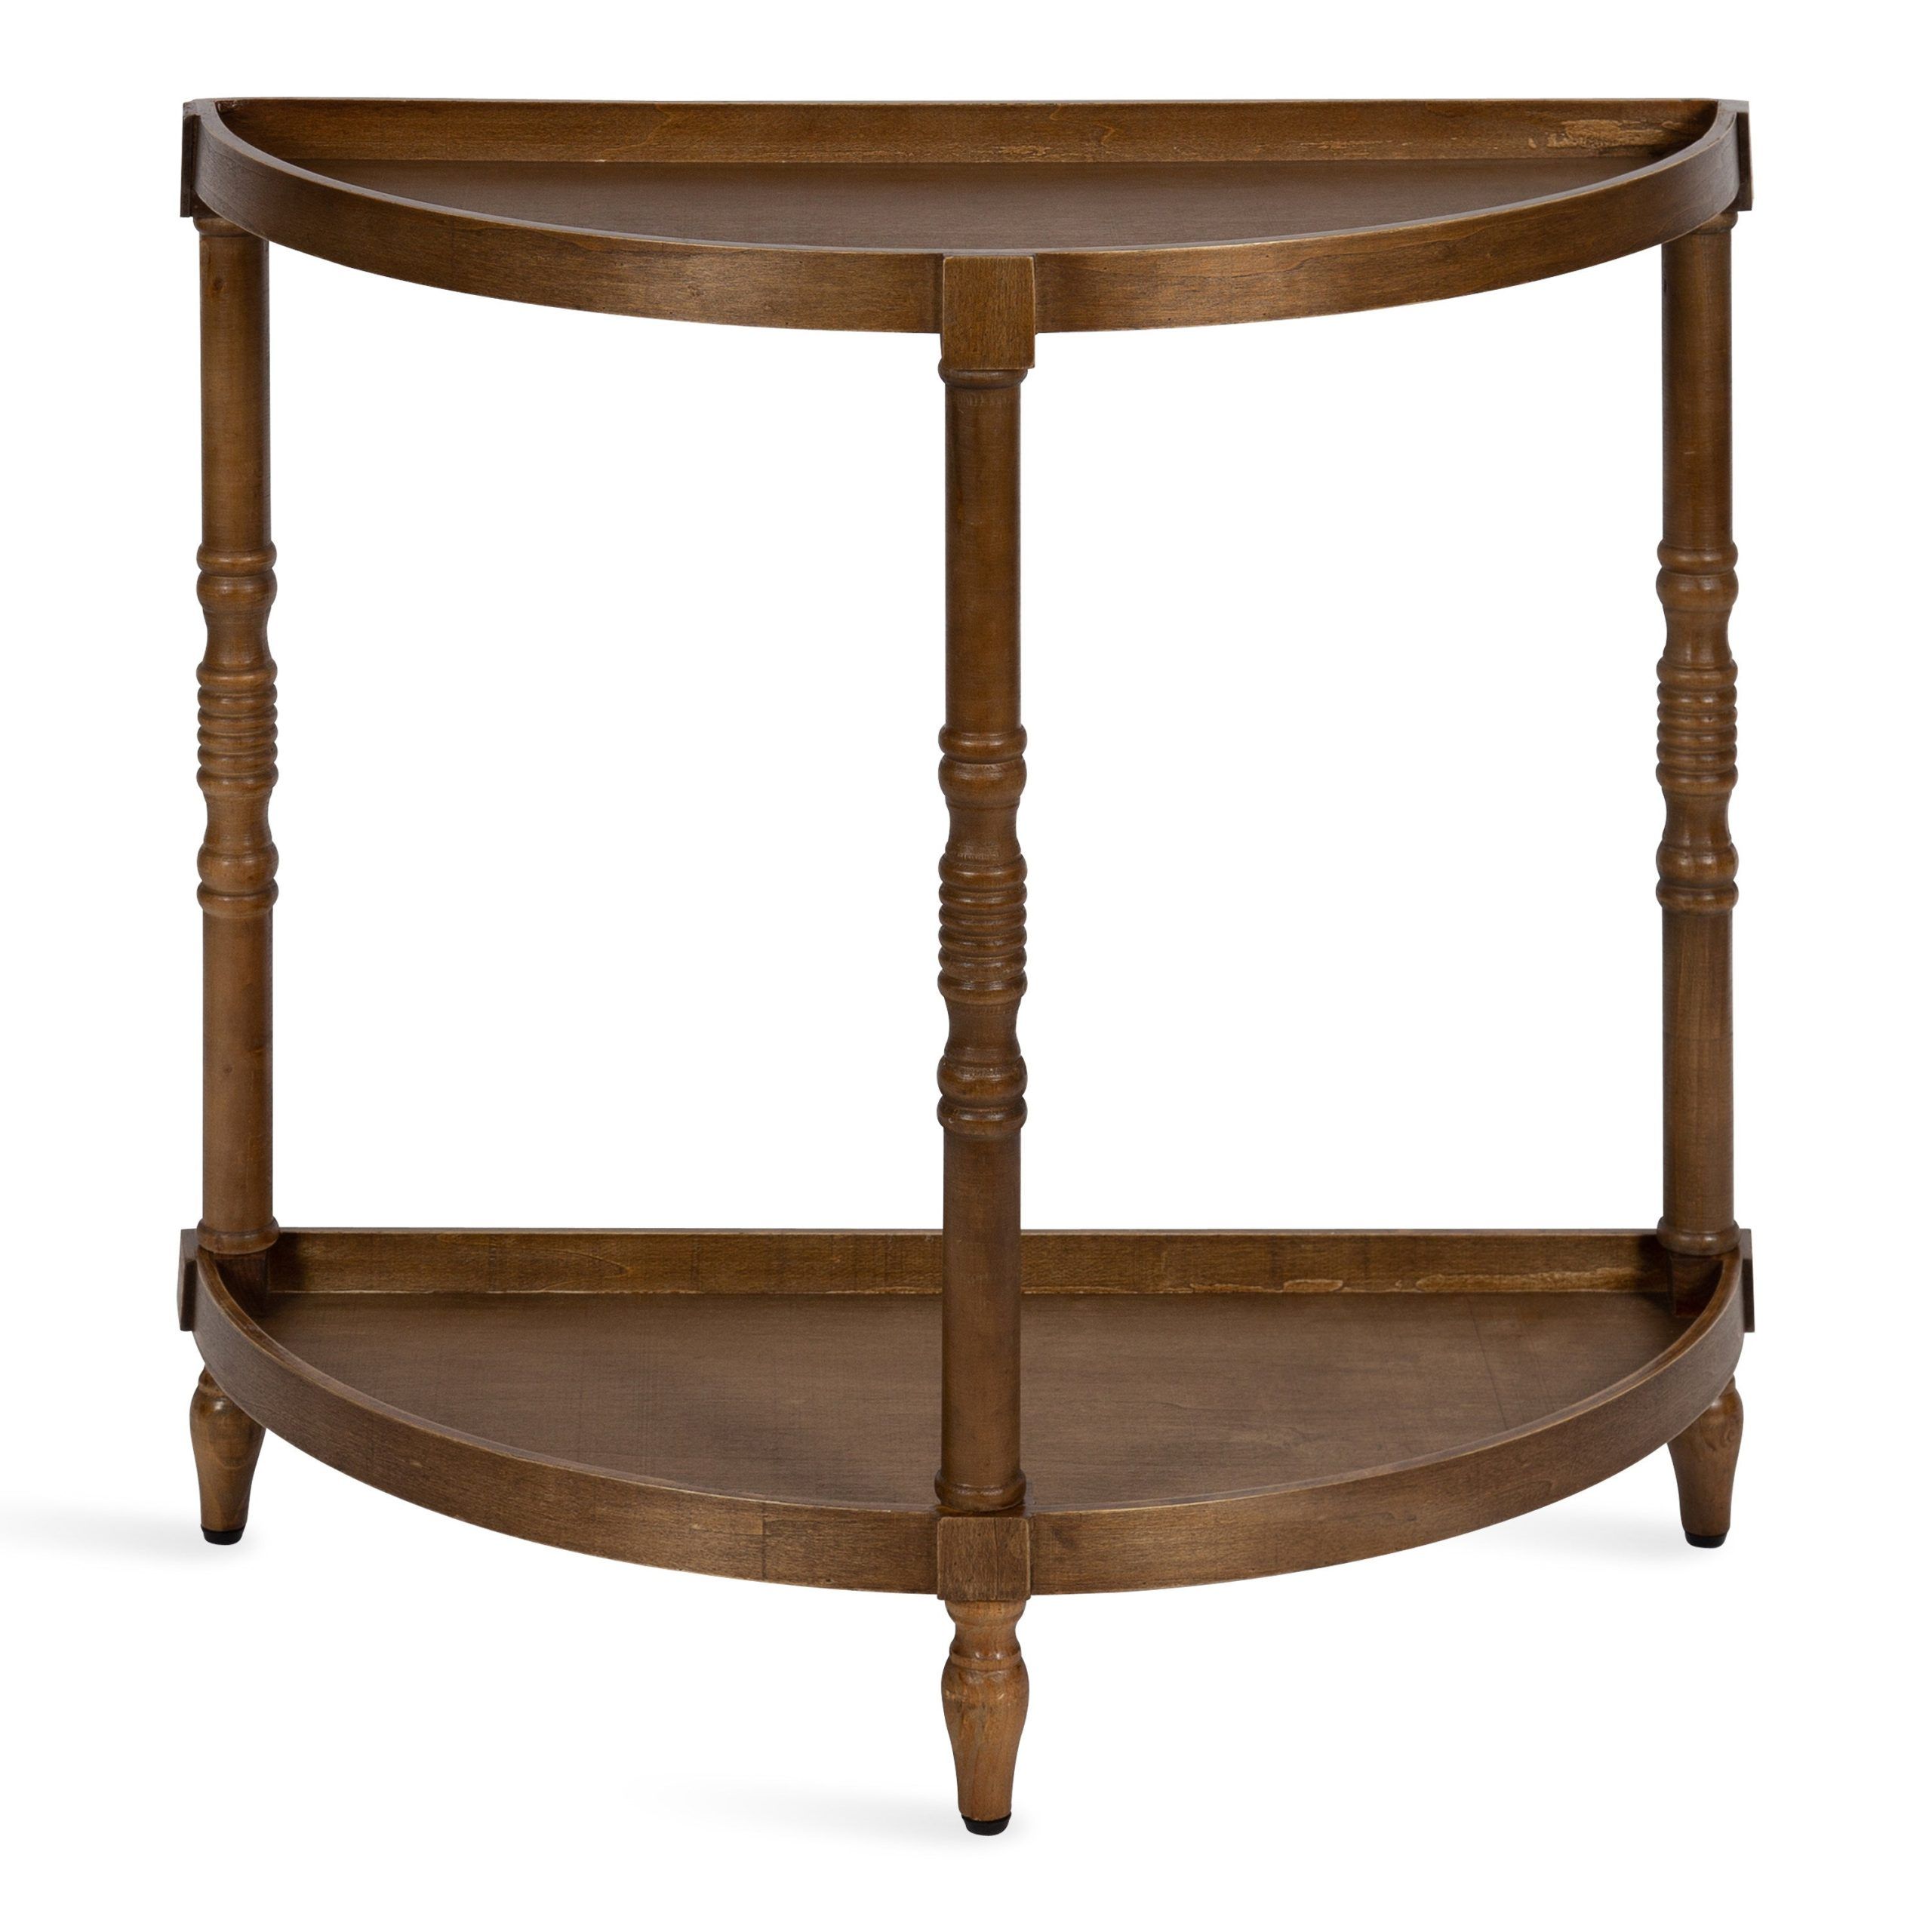 Kate And Laurel Bellport Farmhouse Demilune Console Table, 30 X 14 X 30 For Kate And Laurel Bellport Farmhouse Drink Tables (View 13 of 15)